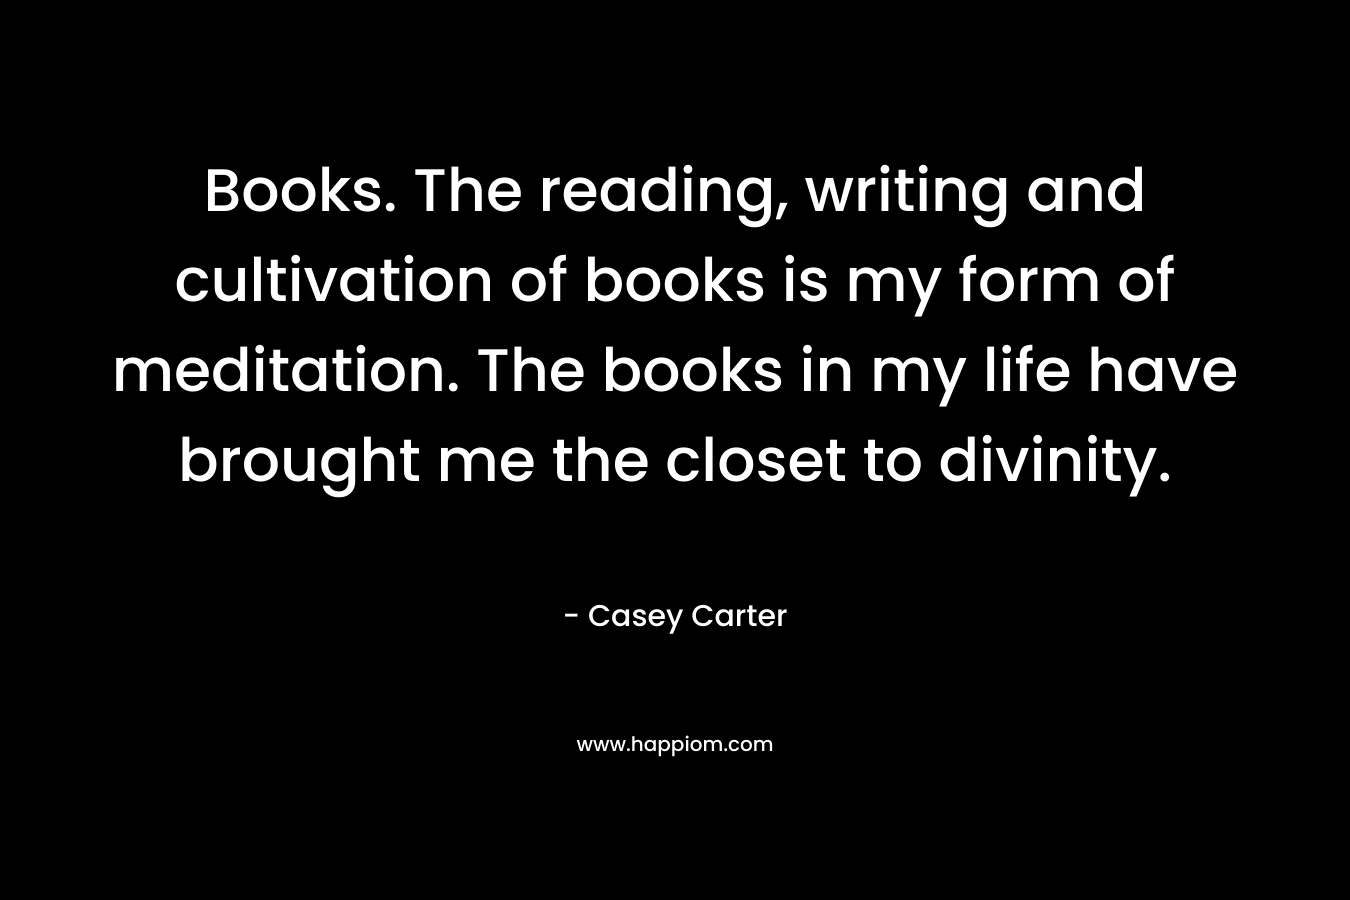 Books. The reading, writing and cultivation of books is my form of meditation. The books in my life have brought me the closet to divinity.